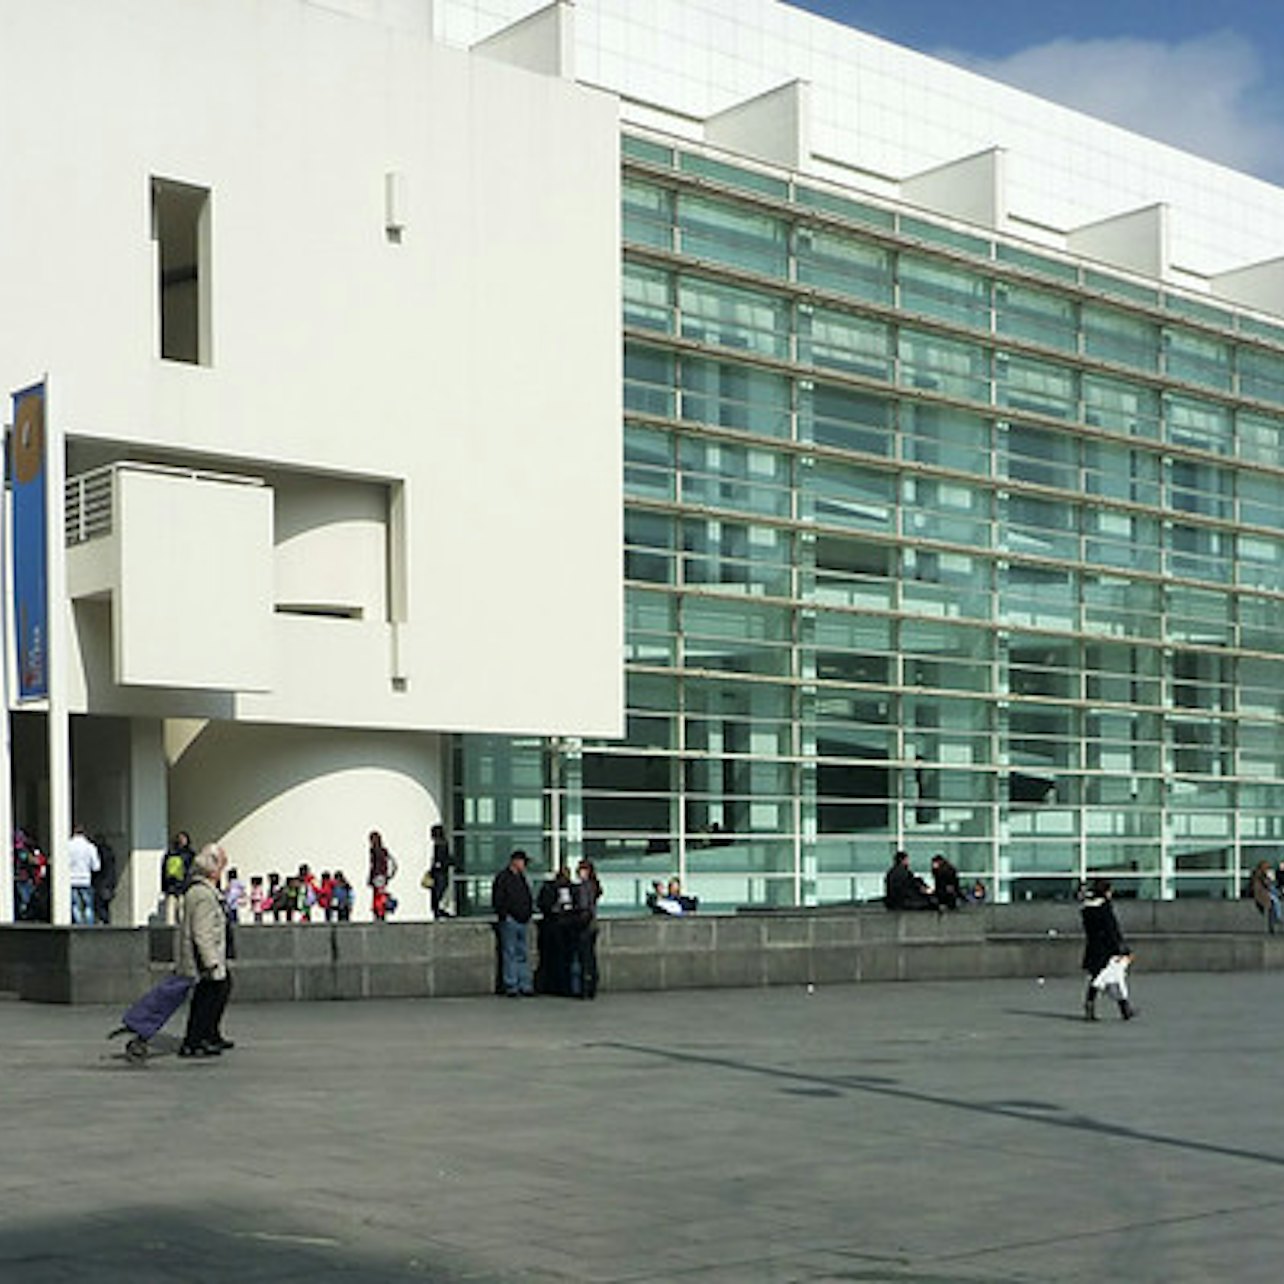 Barcelona Museum of Contemporary Art (MACBA) - Accommodations in Barcelona